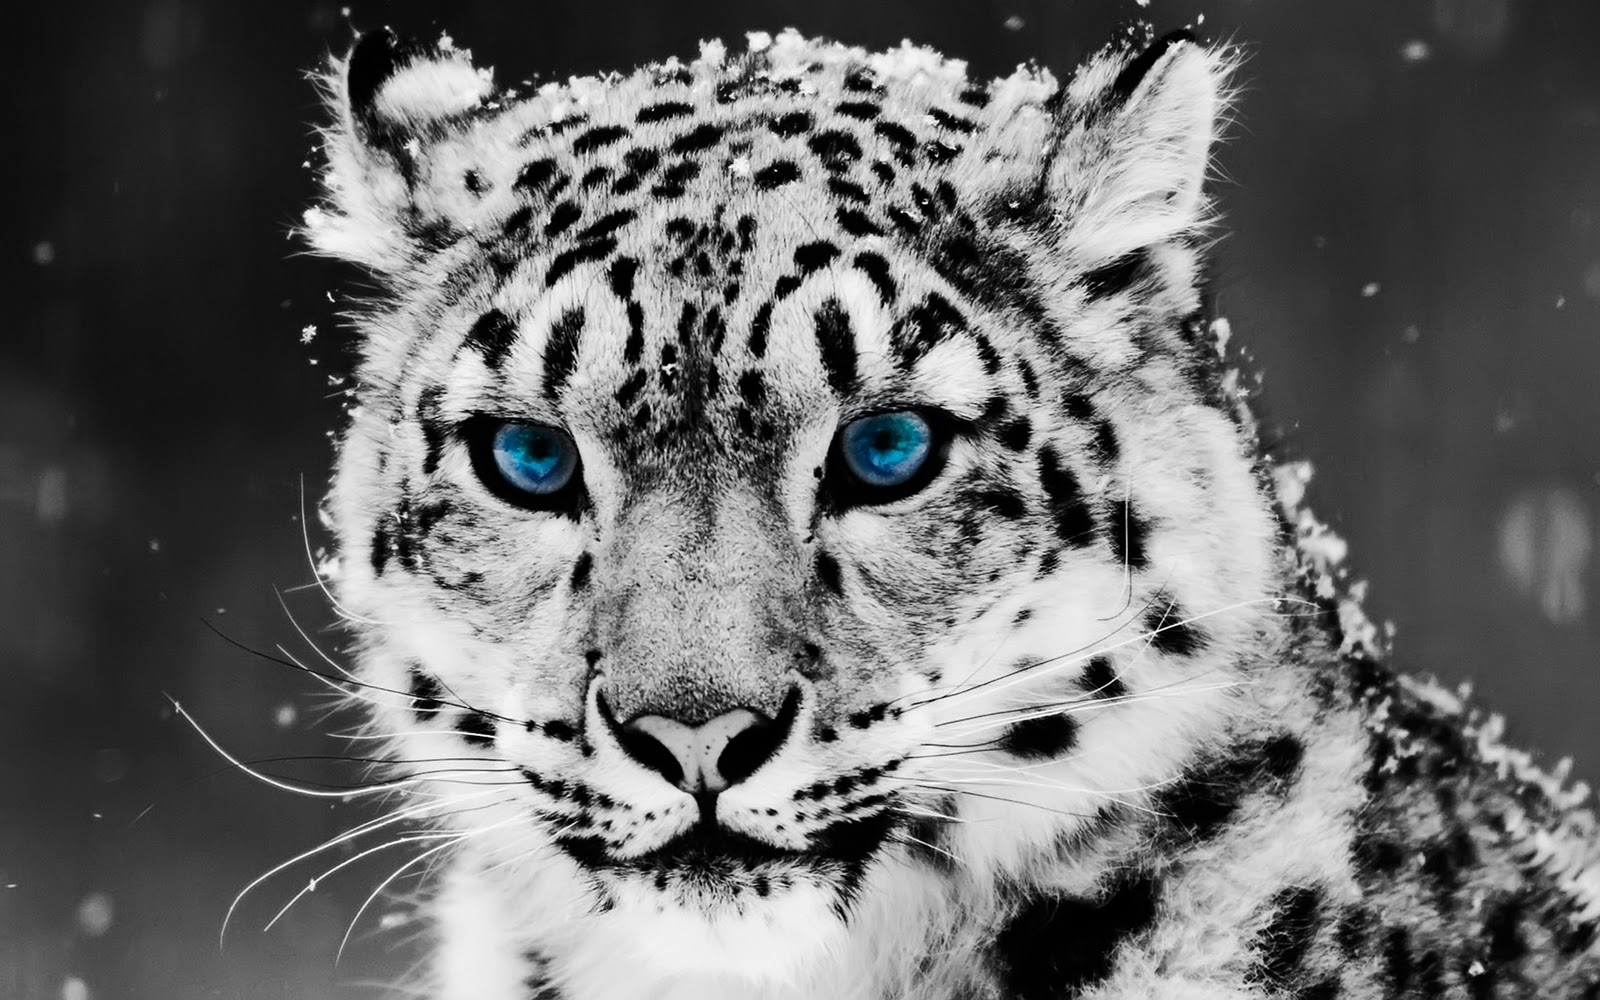  eyes in snow High definition Leopard wallpapers HD Animal in snow